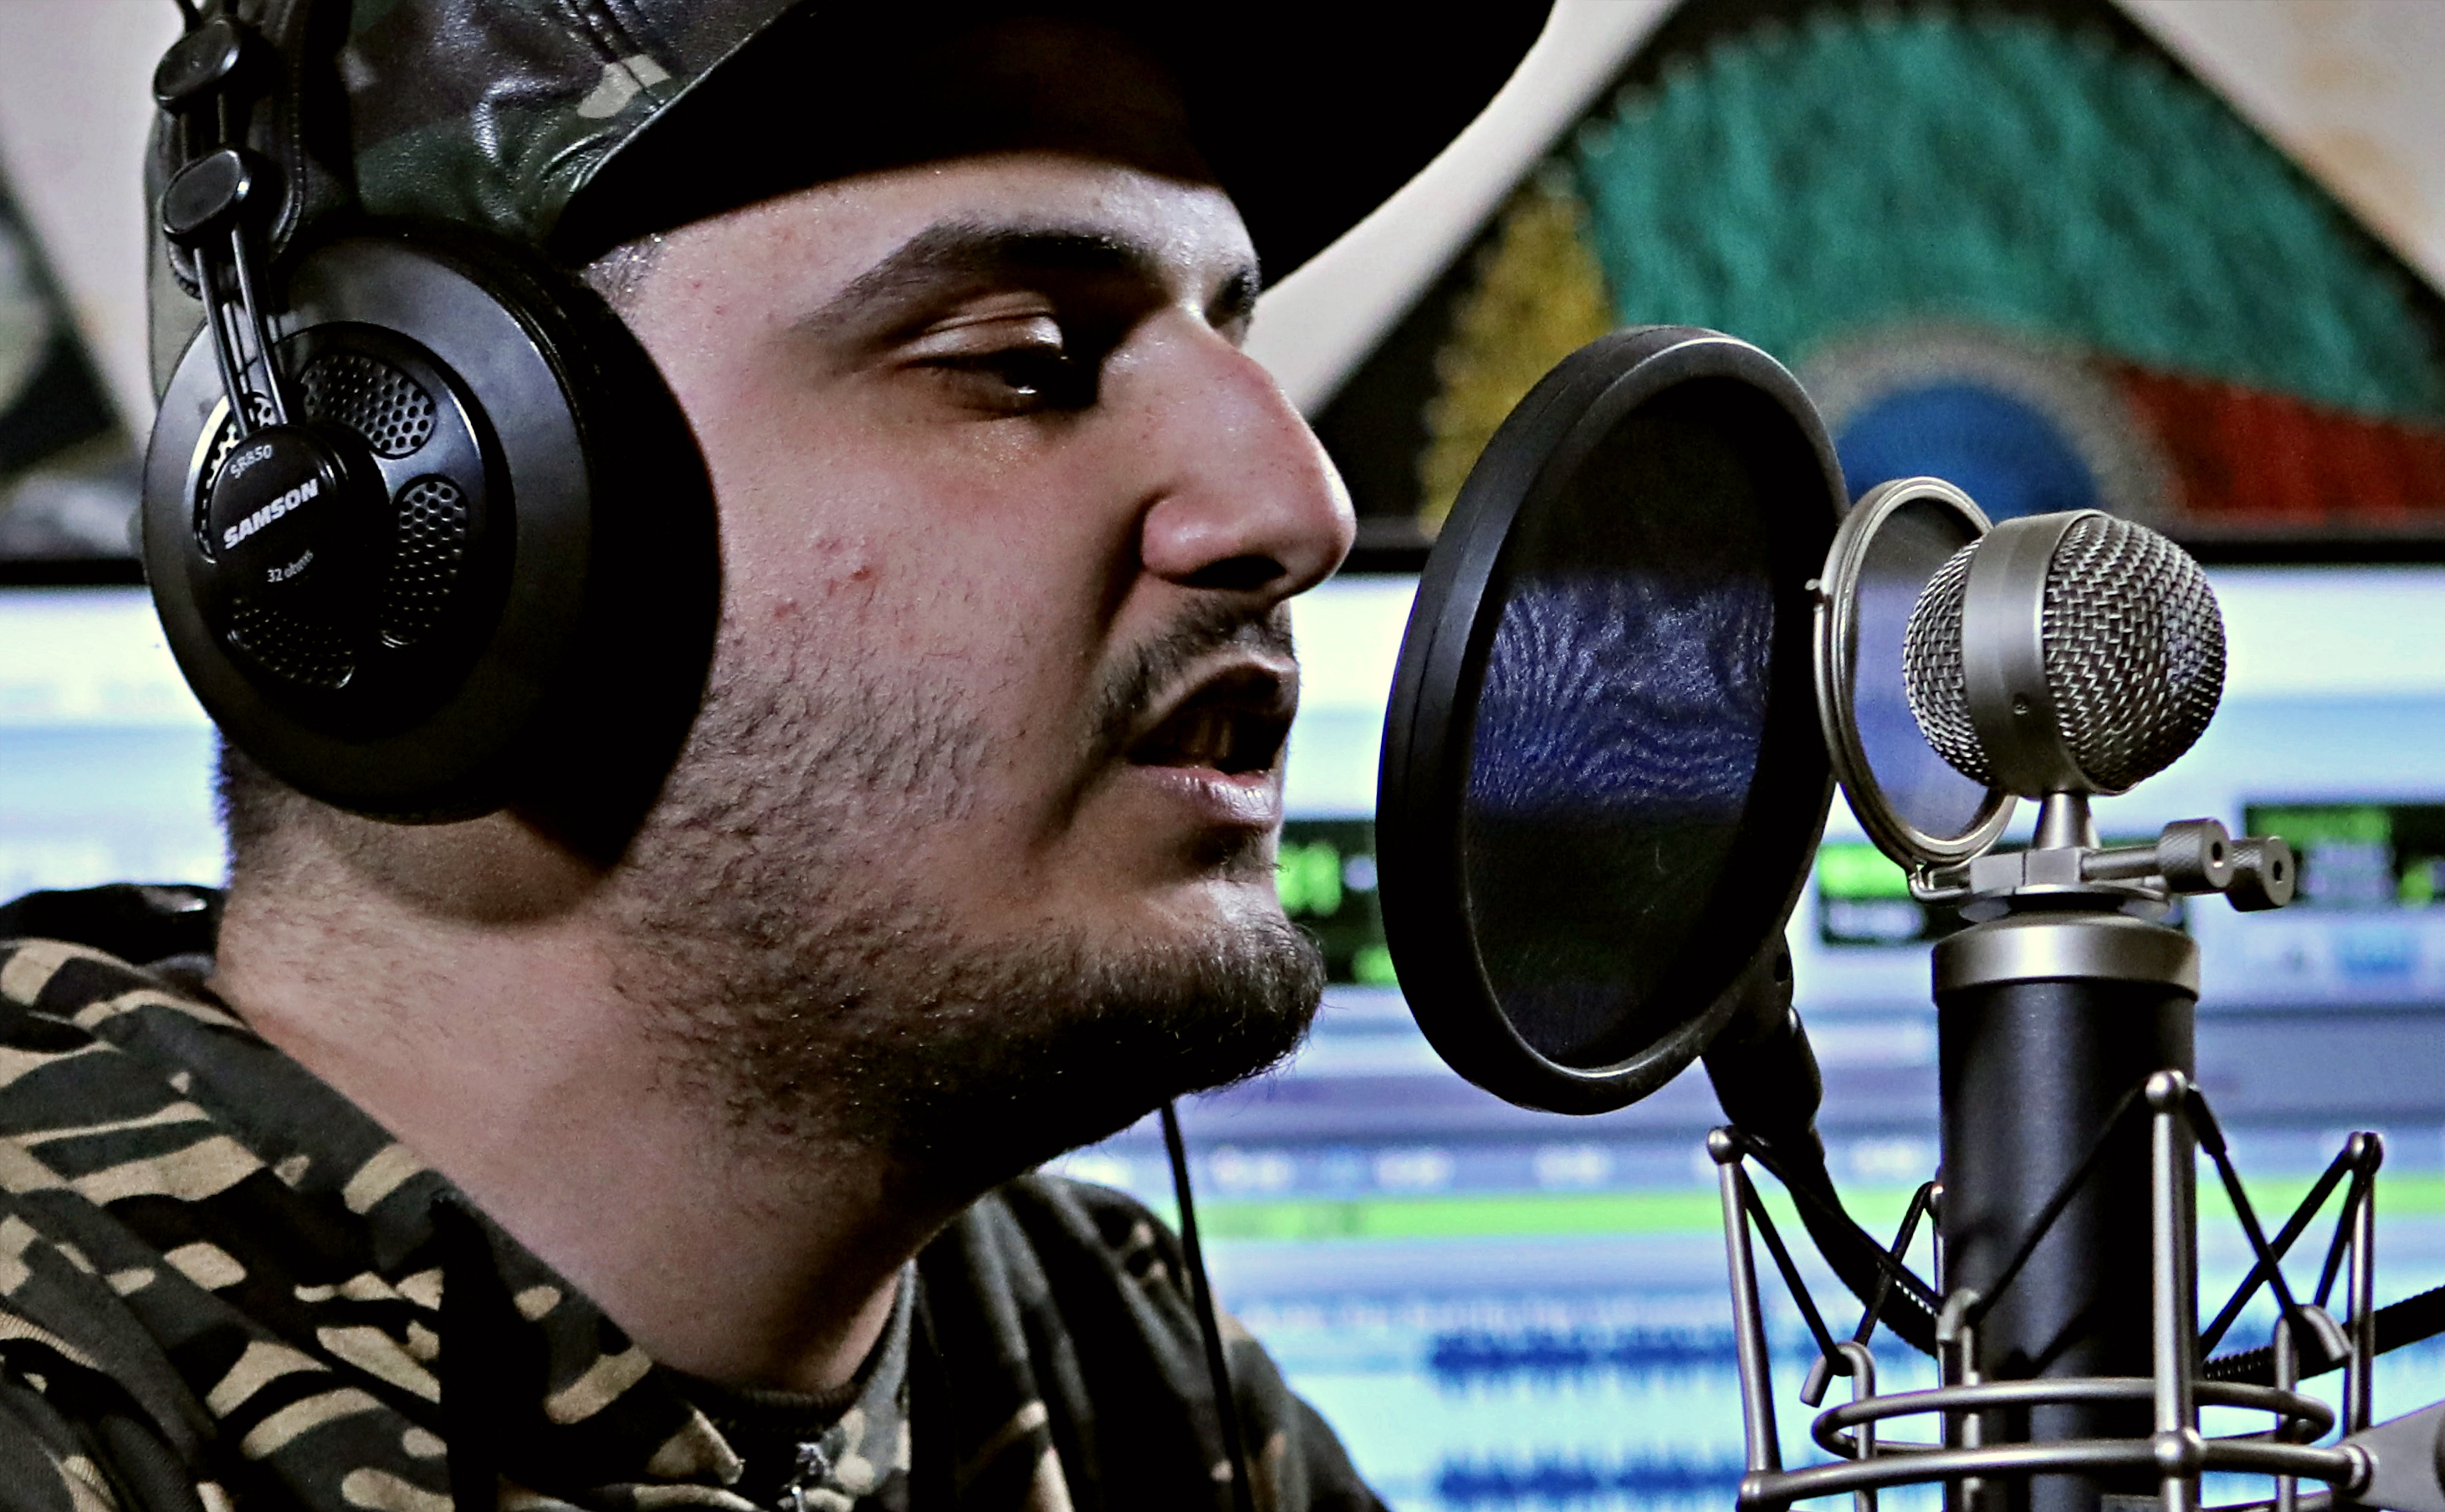 Iraqi rapper gives angry youth in city of Basra music outlet